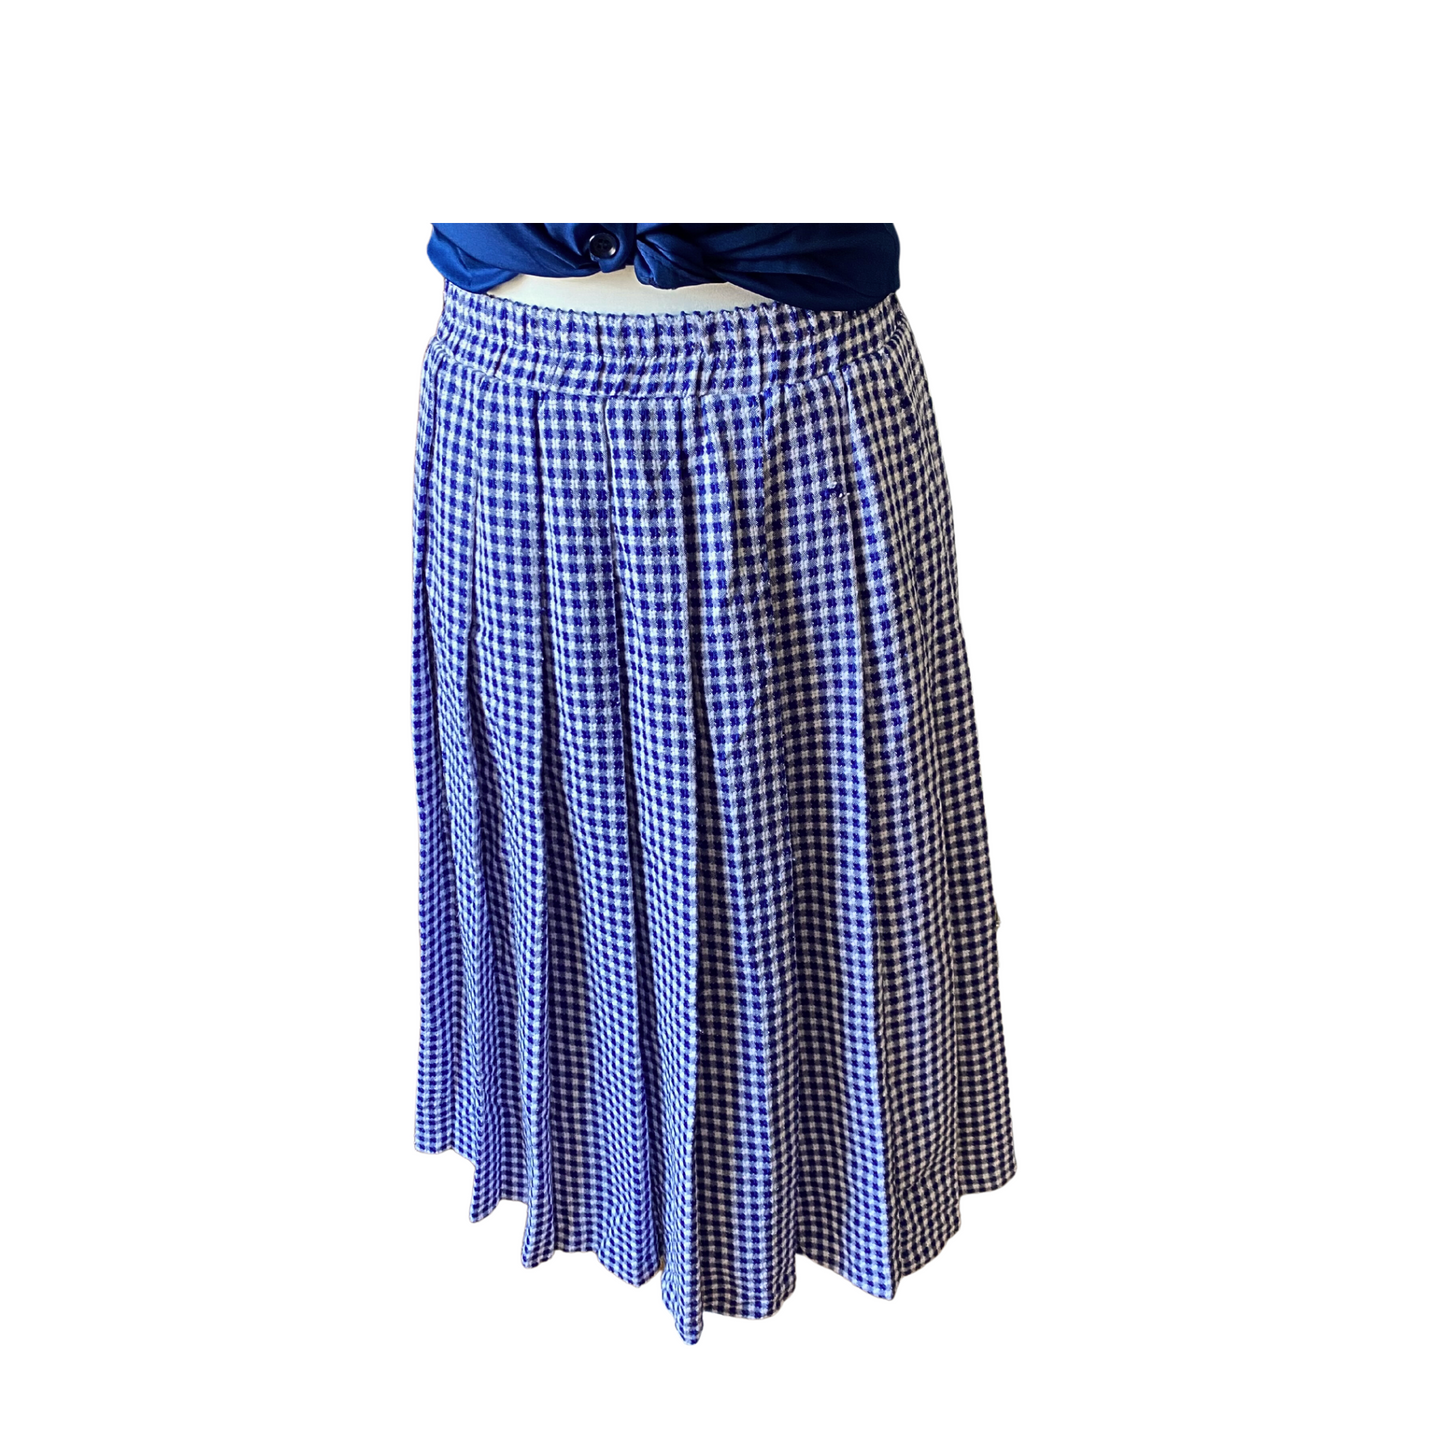 Classic 50s style blue and white checked skirt - must-have for retro lovers